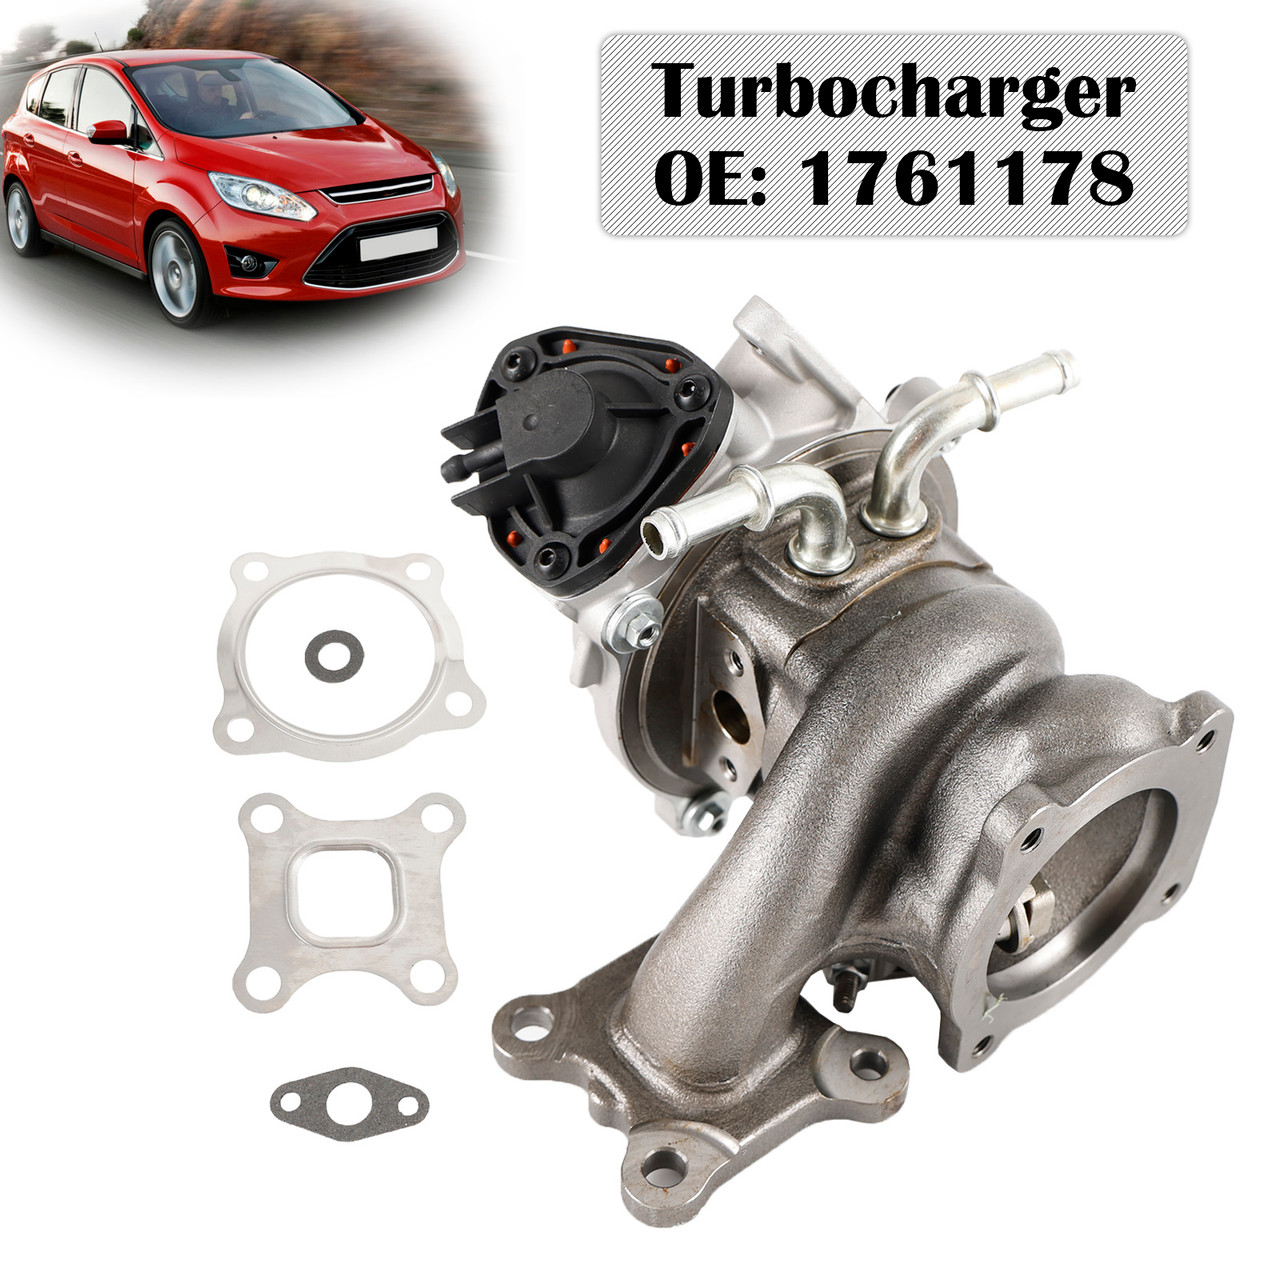 Turbo Charger for Ford Fiesta Focus EcoSport 1.0L EcoBoost 74Kw